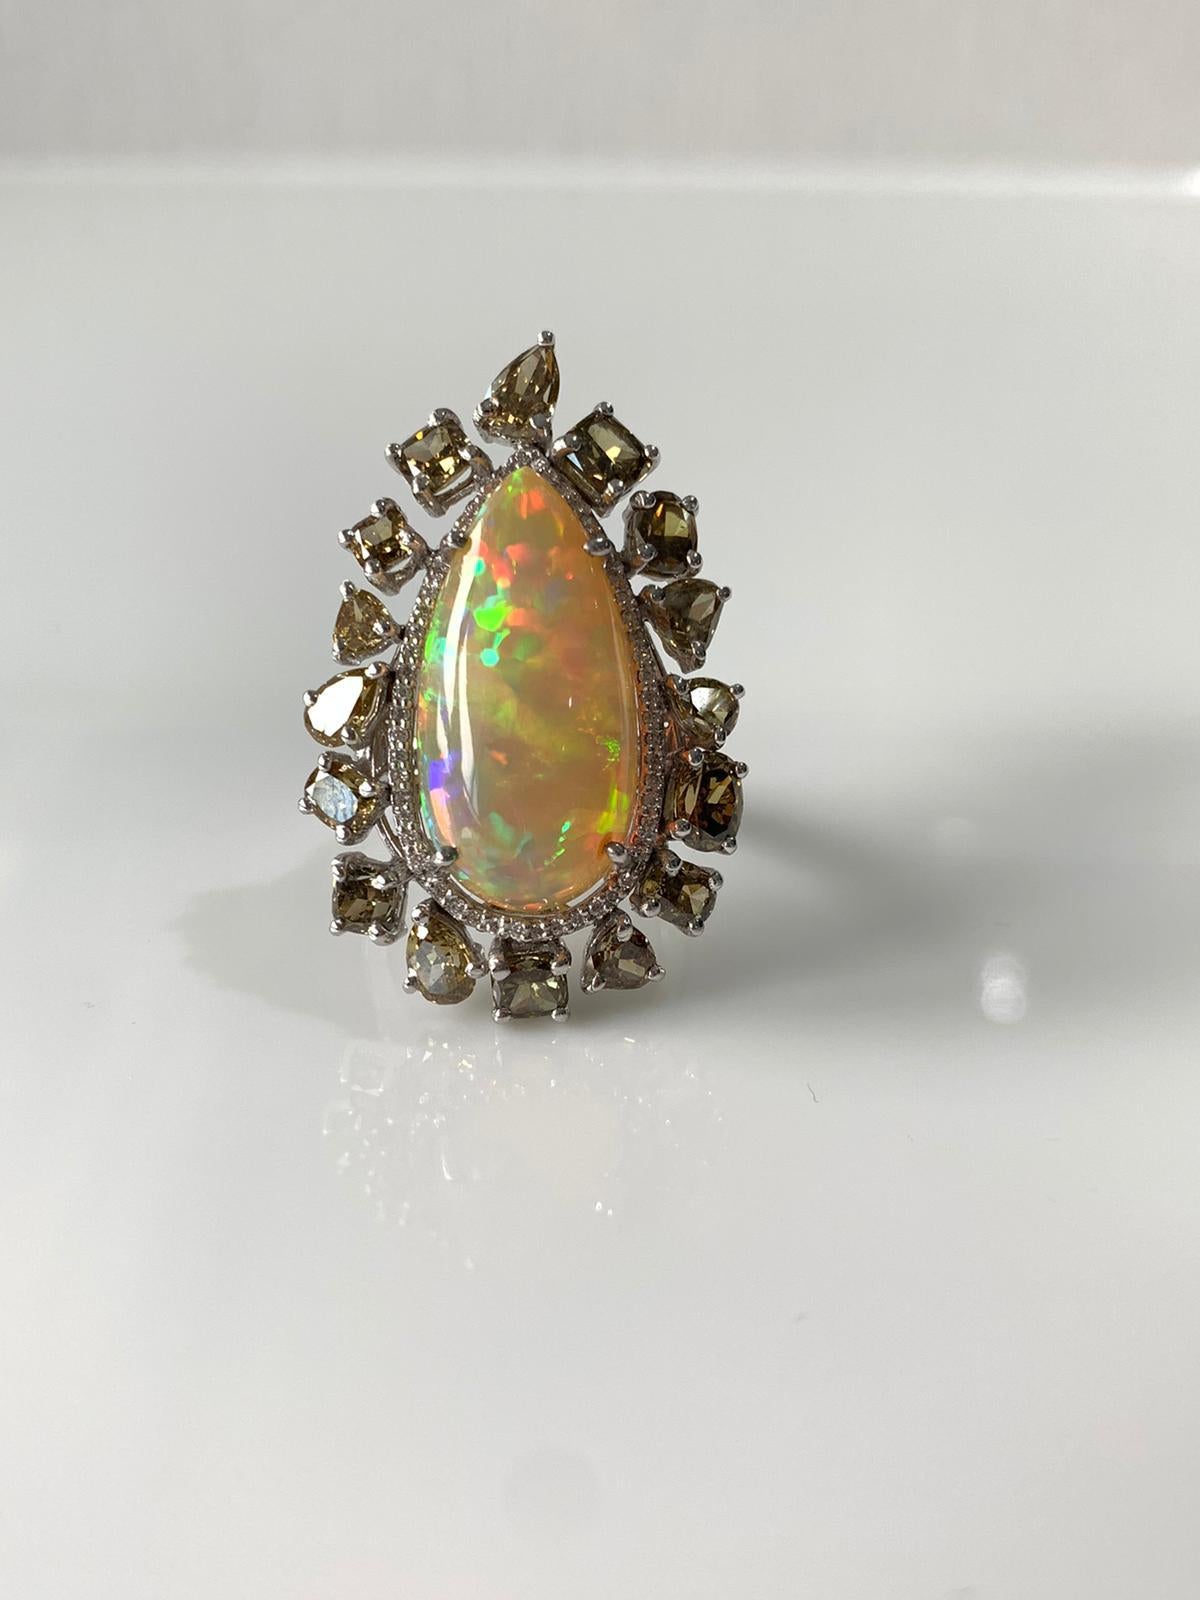 Cabochon Natural Opal and Fancy Diamond Ring Set in 18 Karat Gold